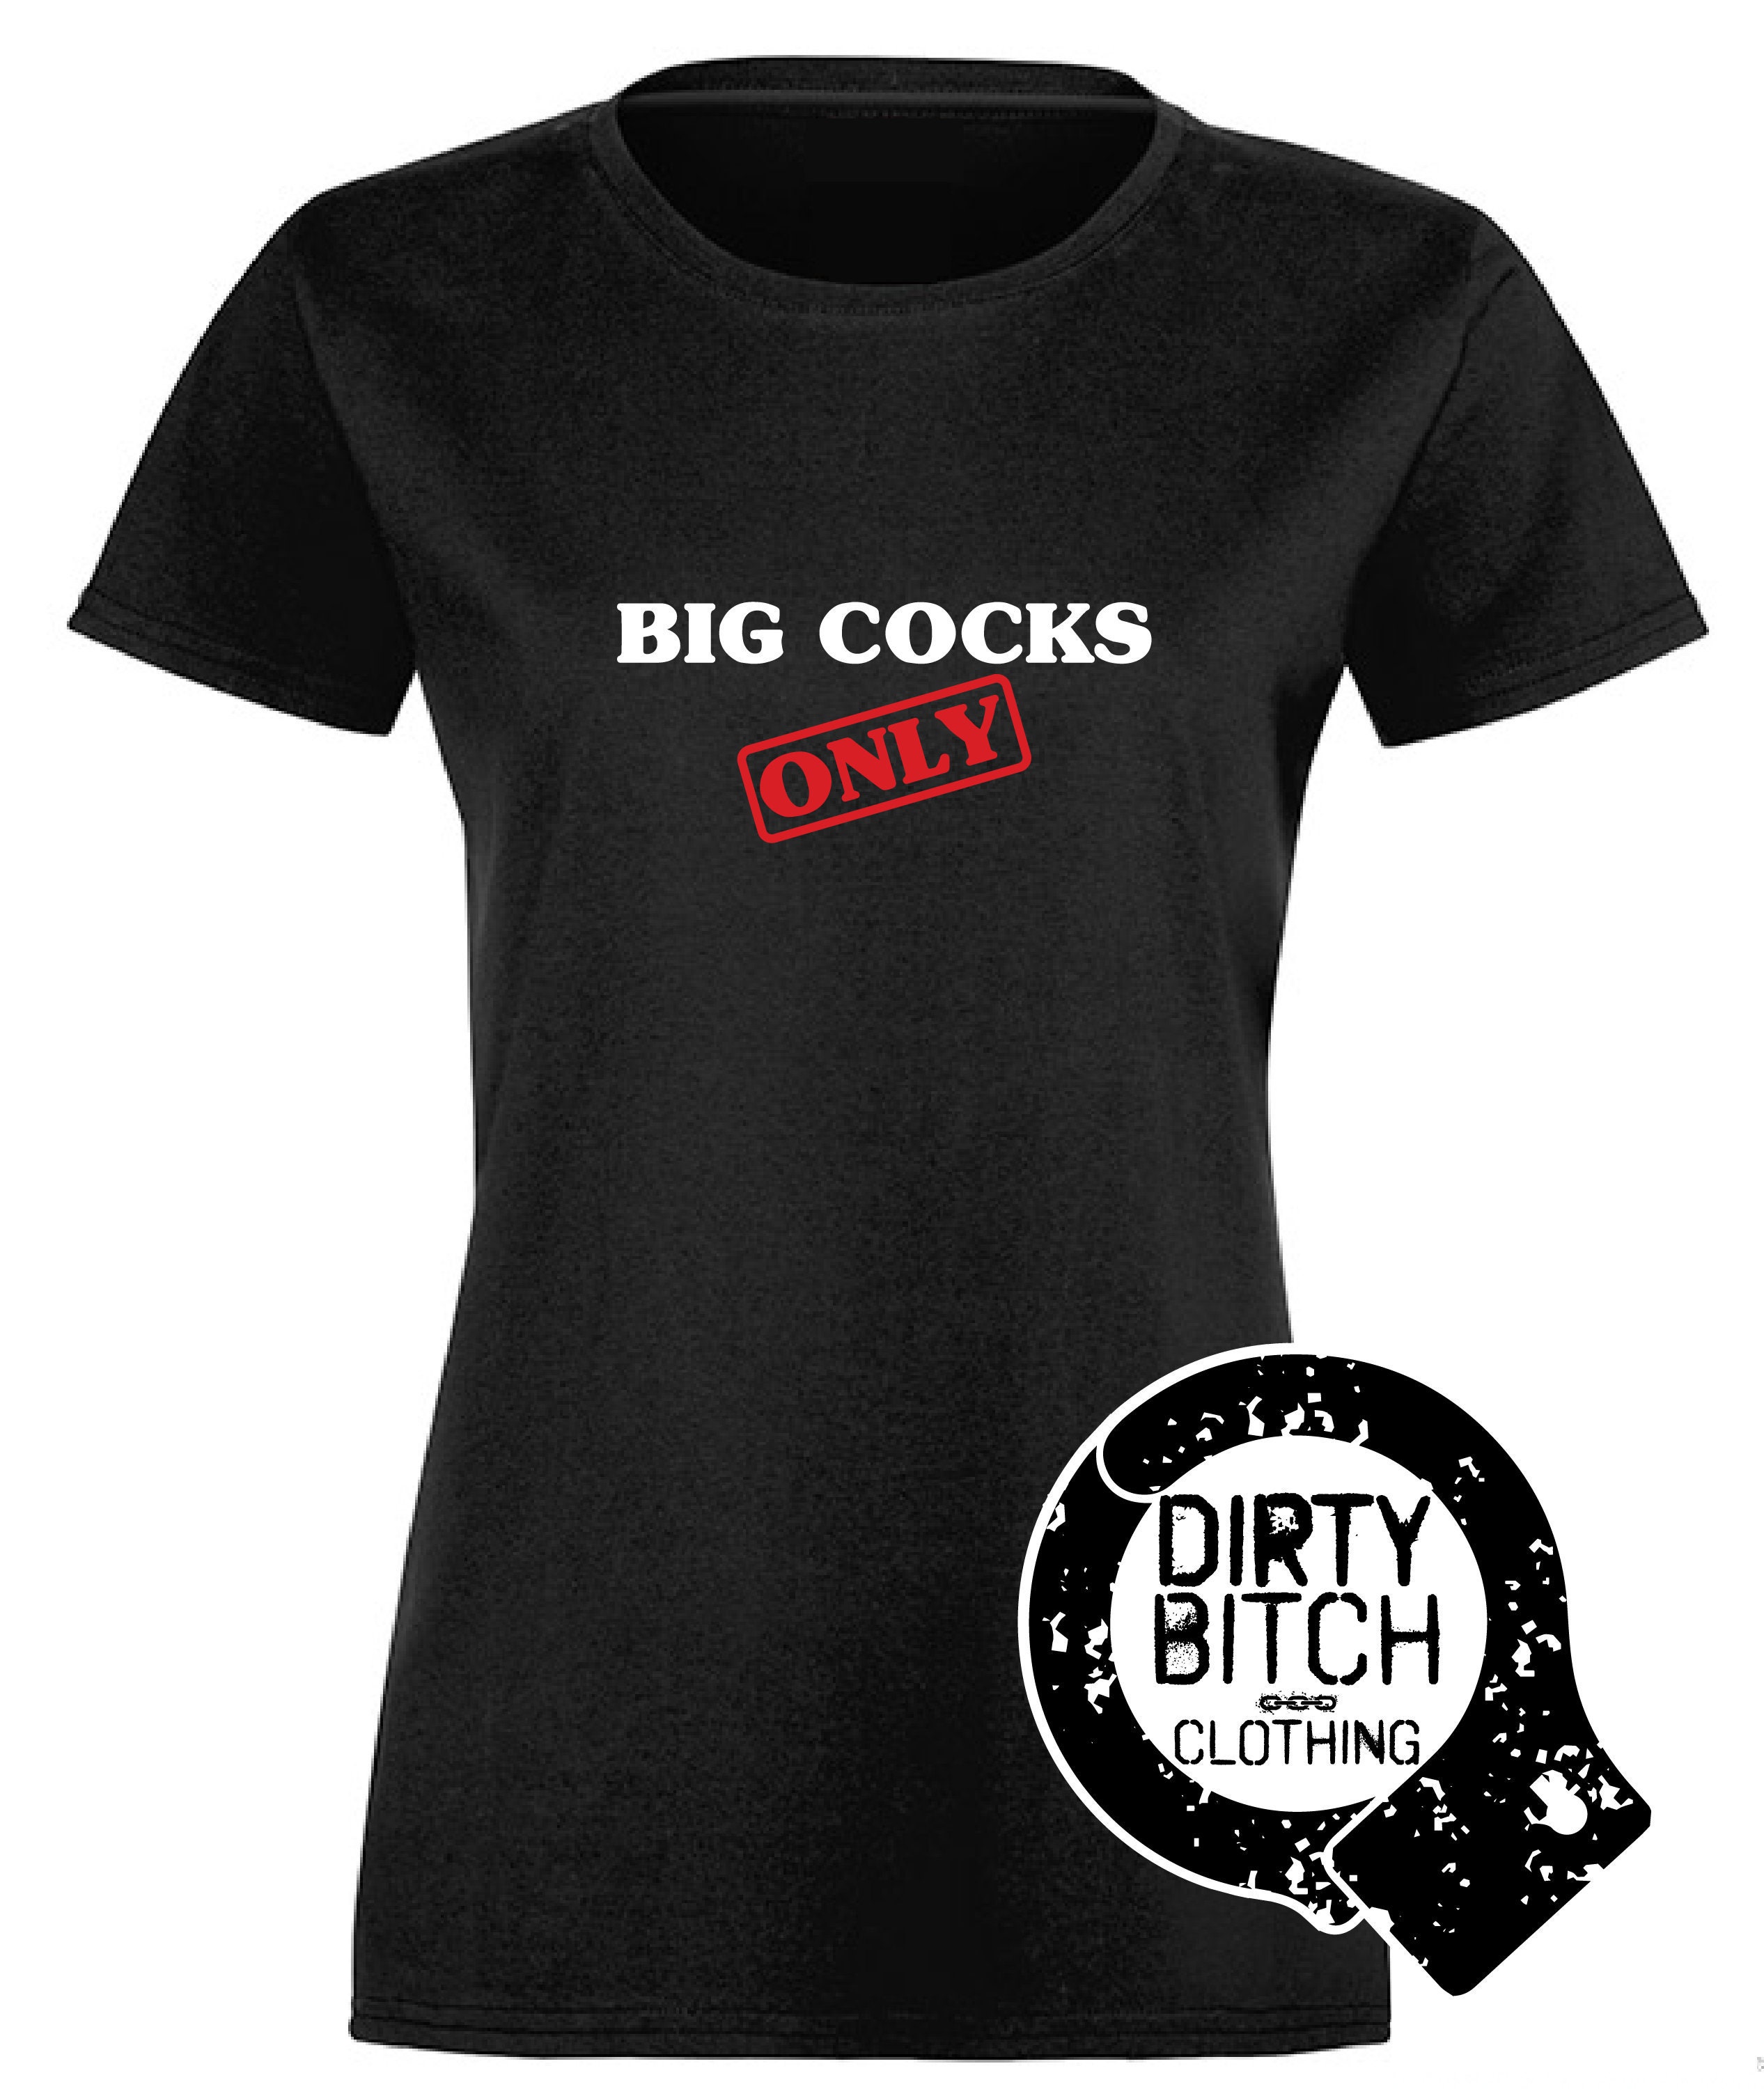 Big Cocks Only Adult T-shirt Clothing Boobs Hotwife pic